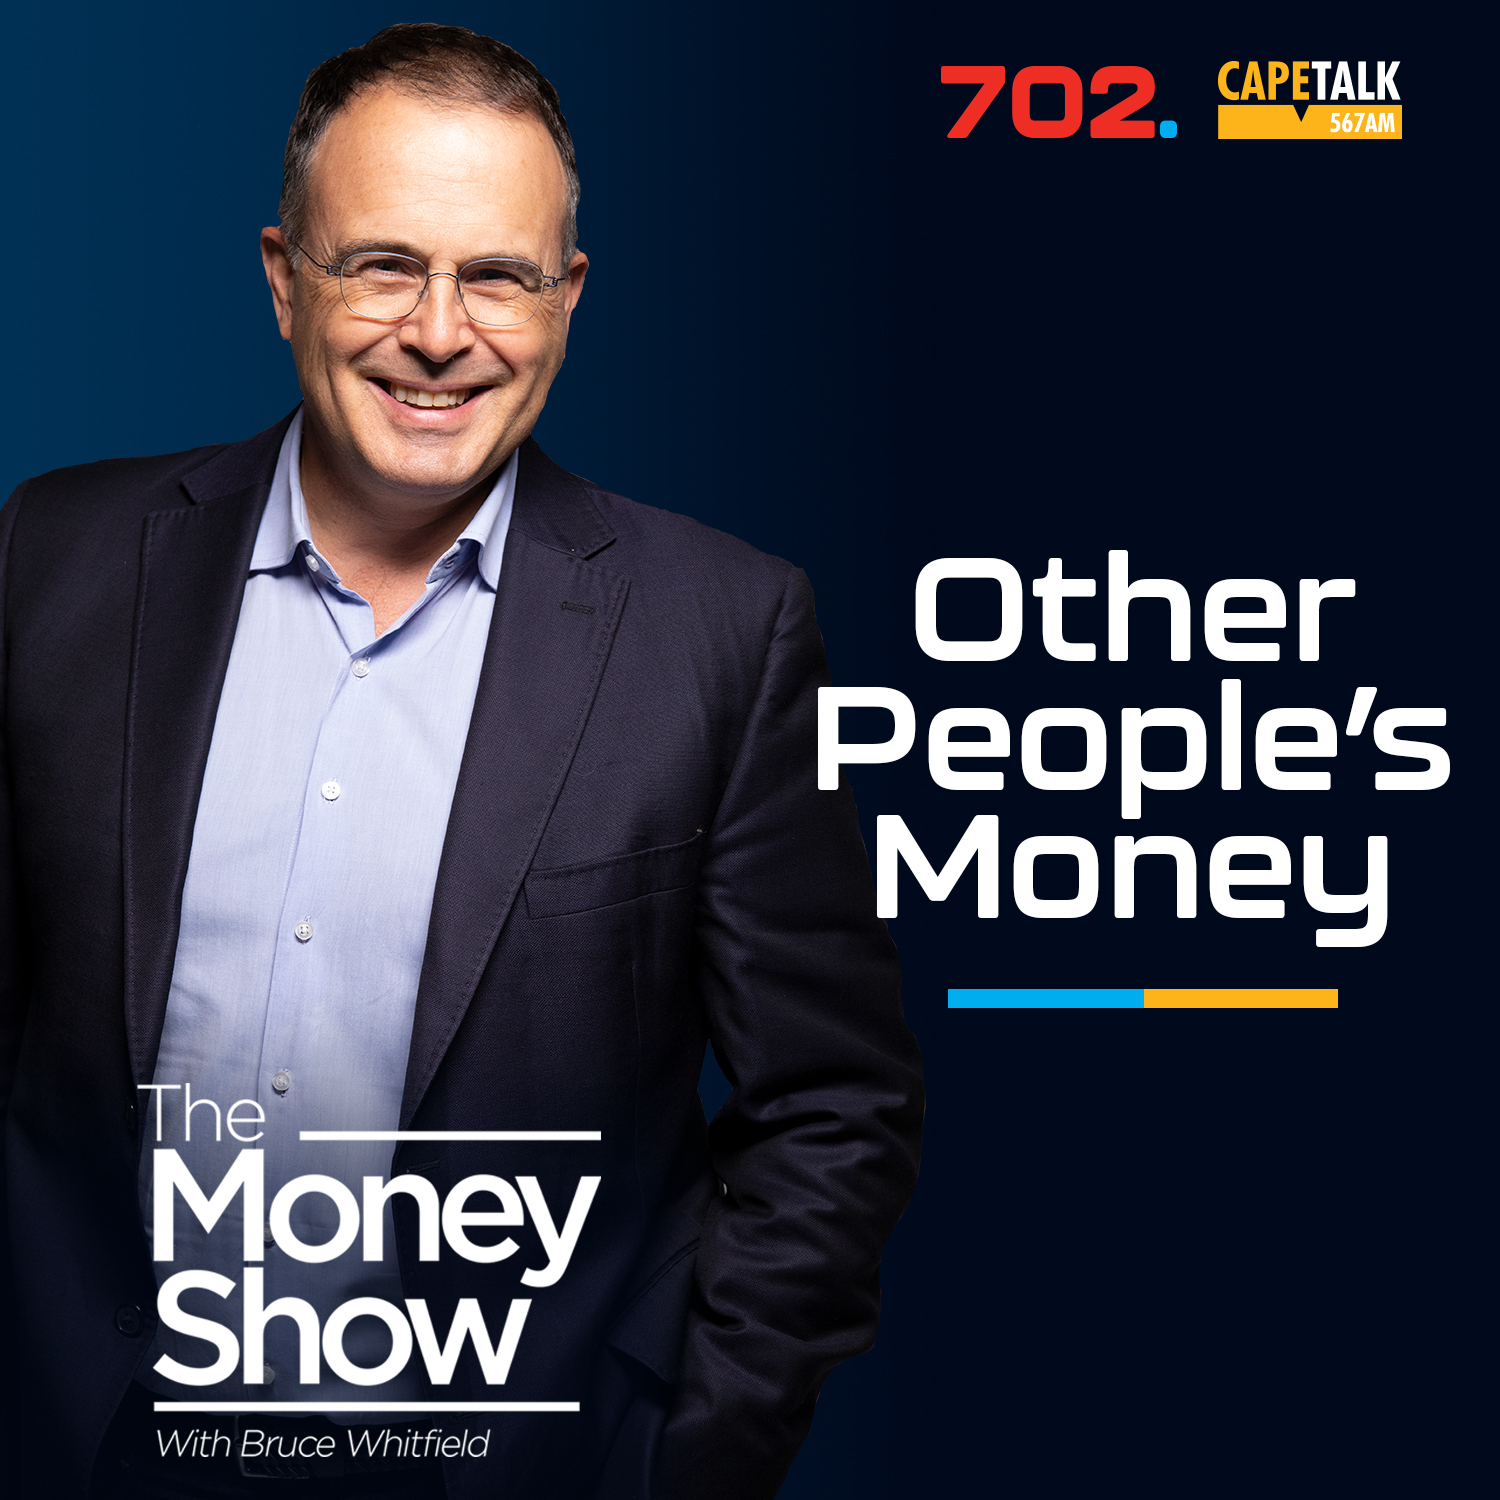 Other People’s Money -  The Naked Scientist, Dr Chris Smith